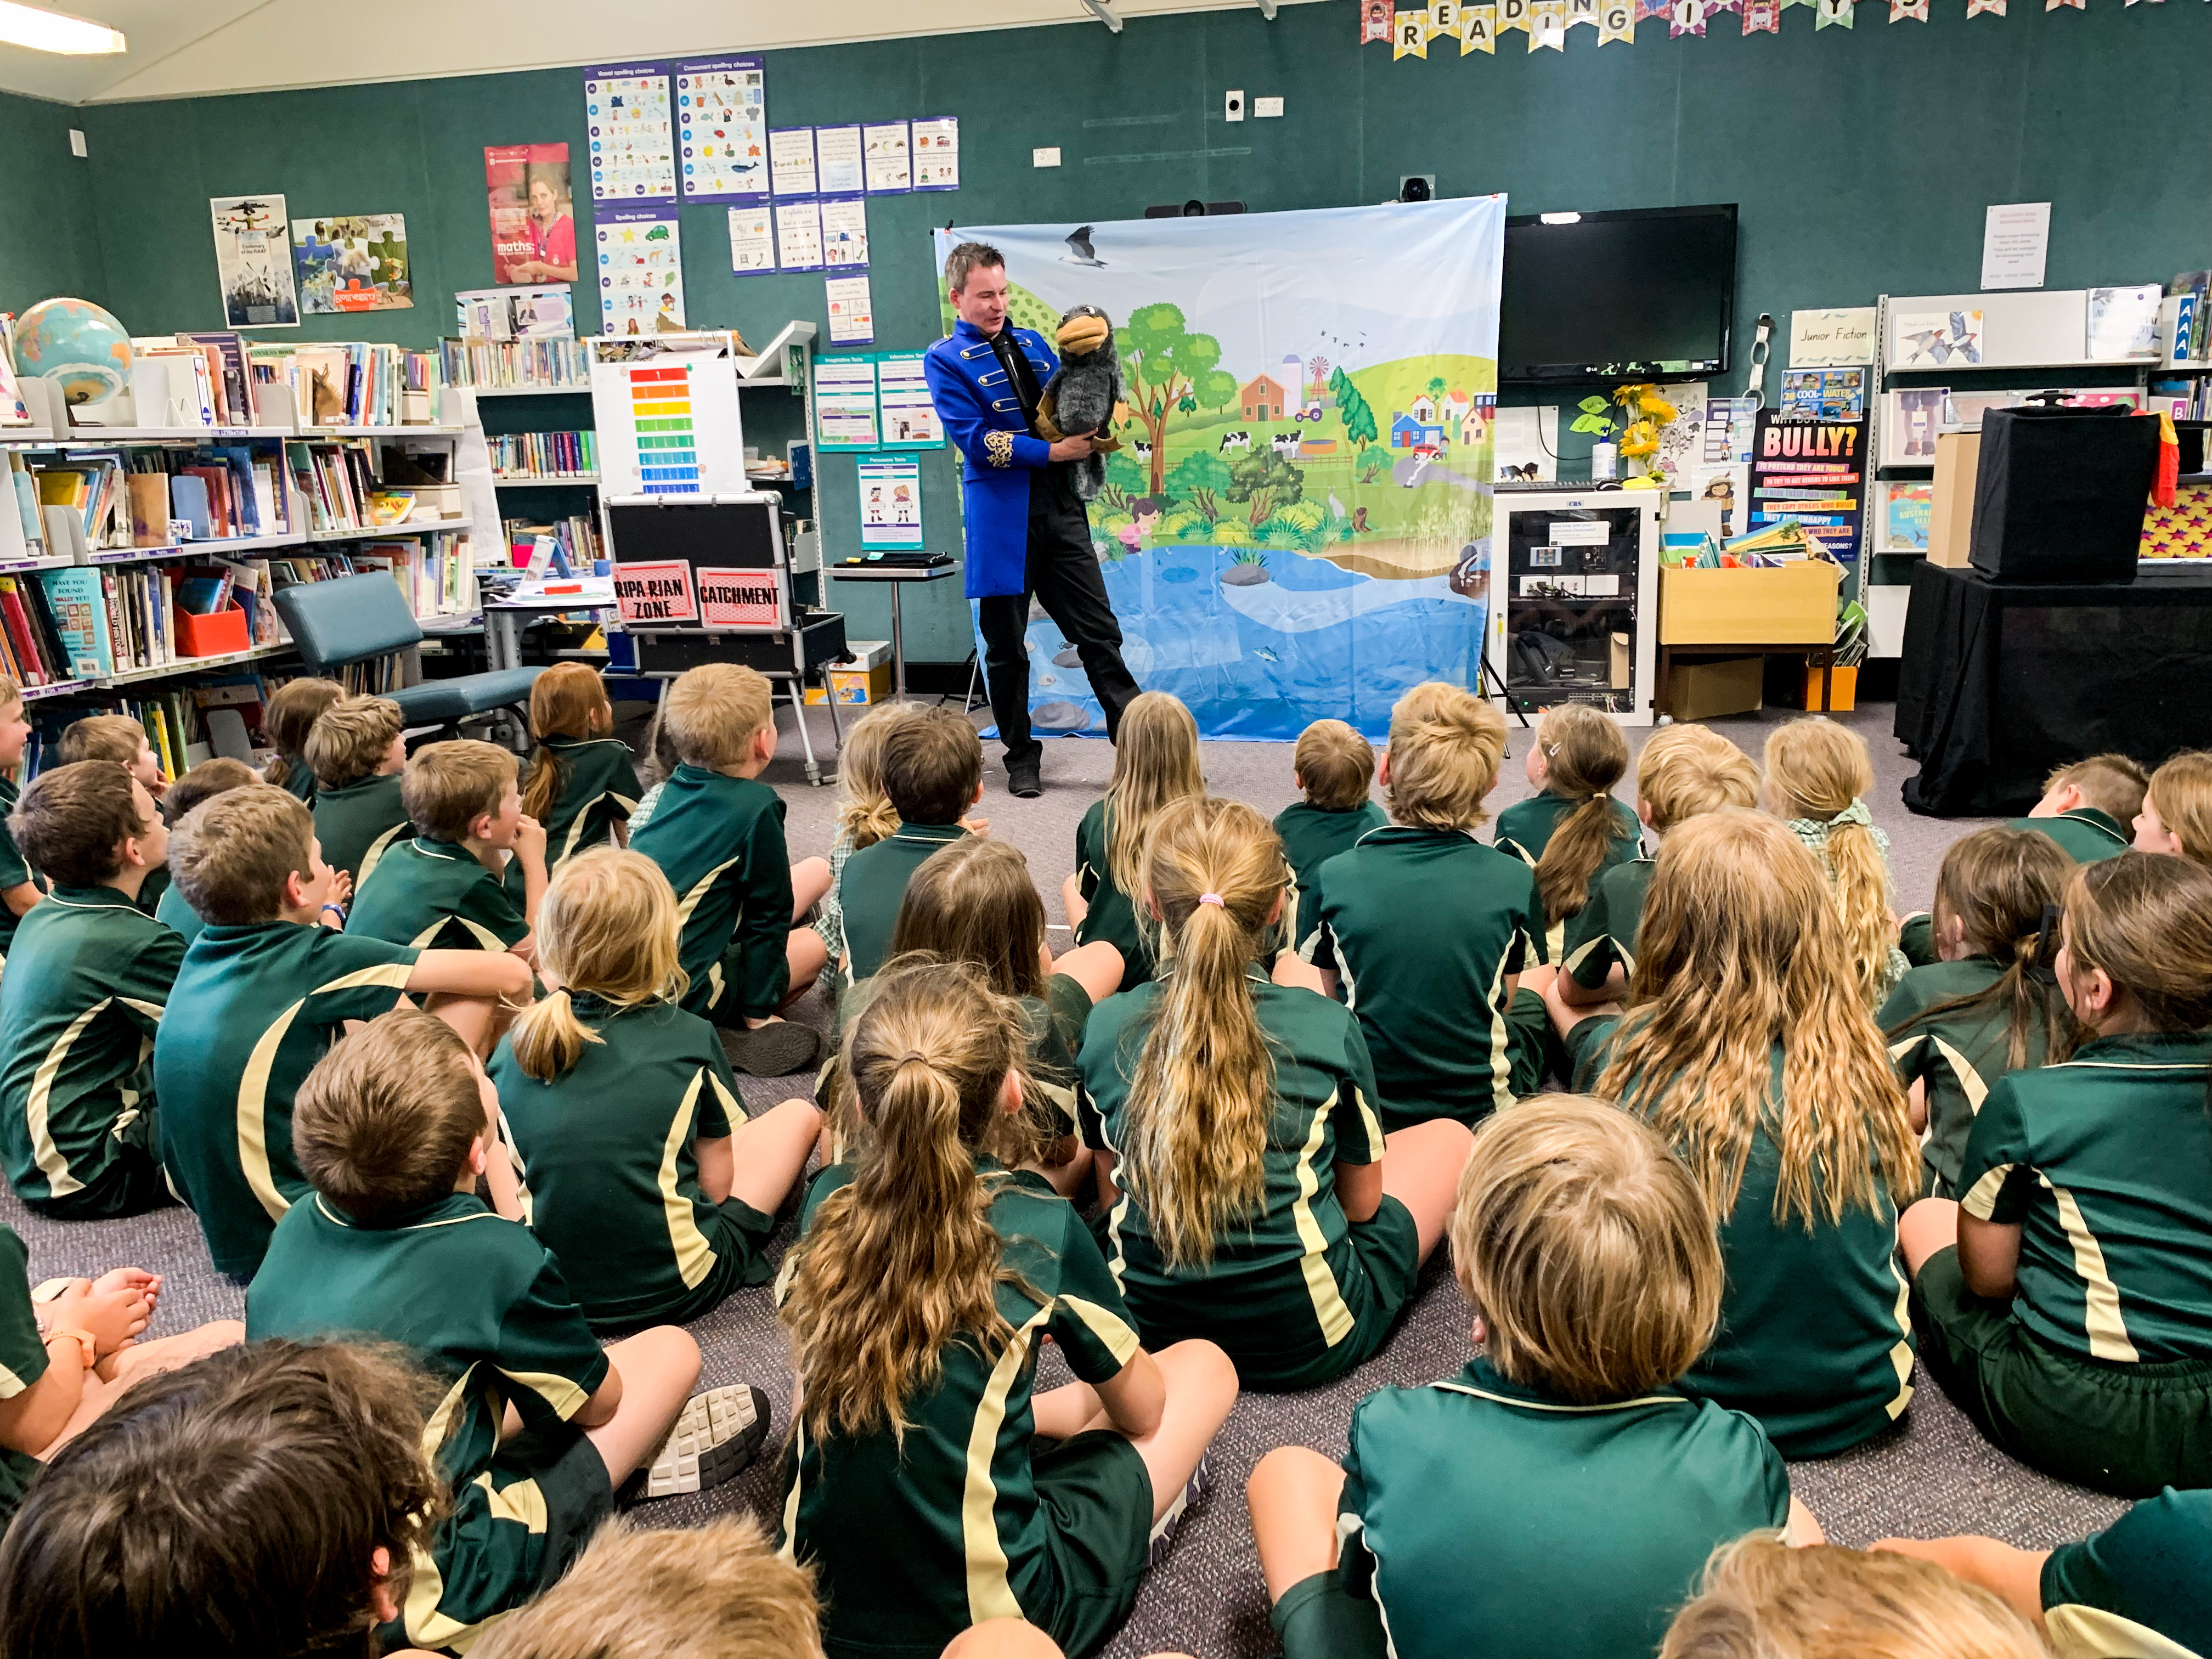 A classroom of children sitting on the floor listening to a man in a blue coat with a platypus puppet